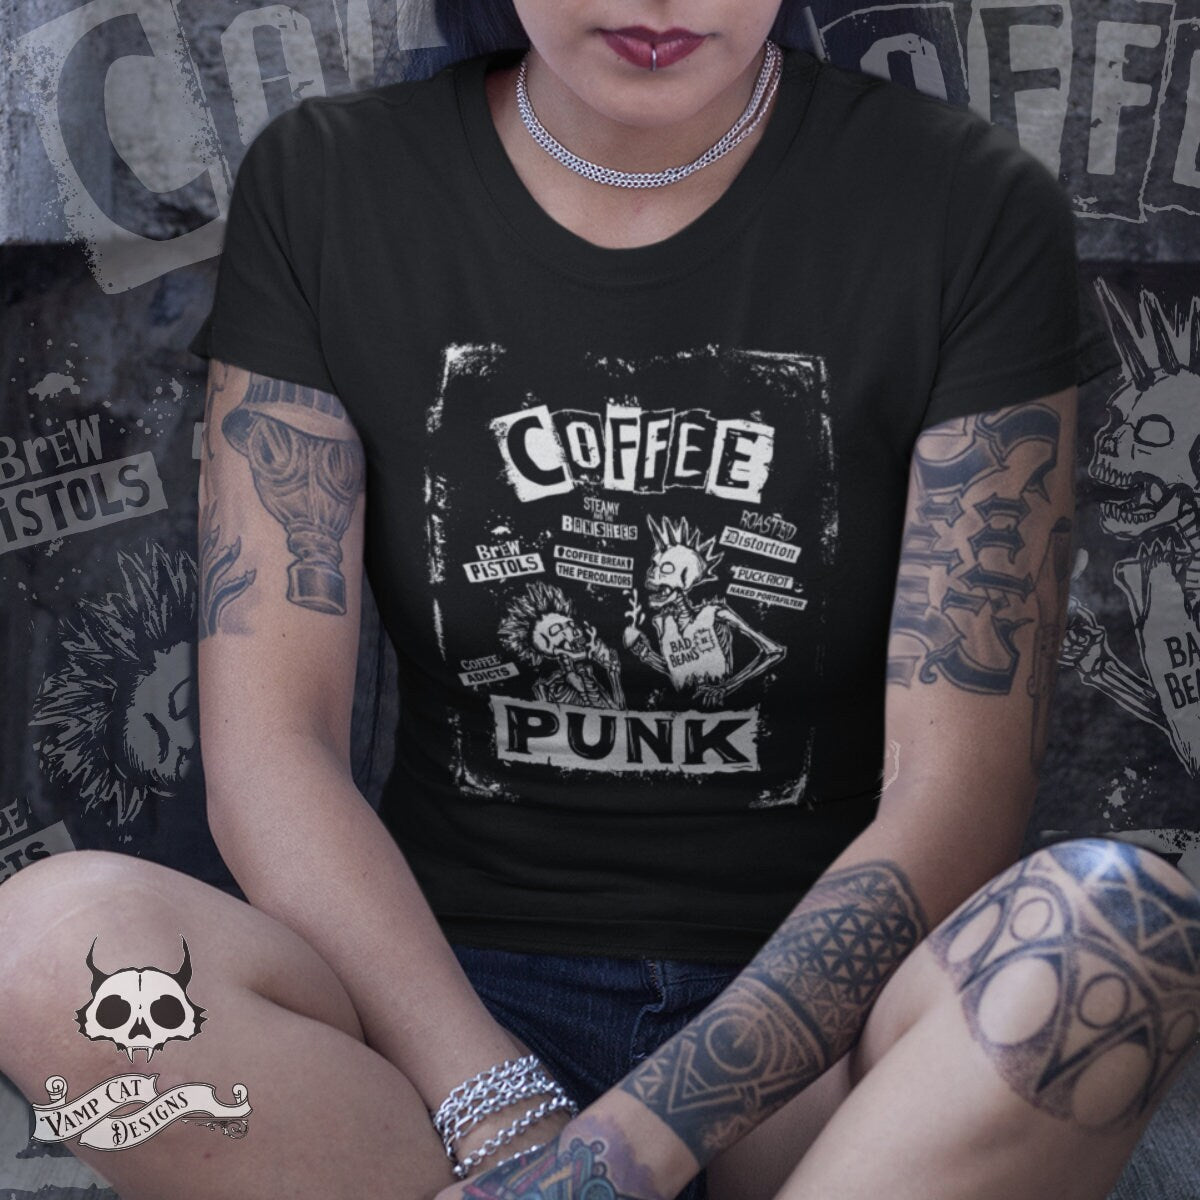 Coffee Punk T-Shirt Poster Style-Punk Bands Women's Shirt-Coffee Lovers-Punk Lovers-Graphic Tee-Coffee Puns-Band Puns-Punk Tee-Graphic Tee